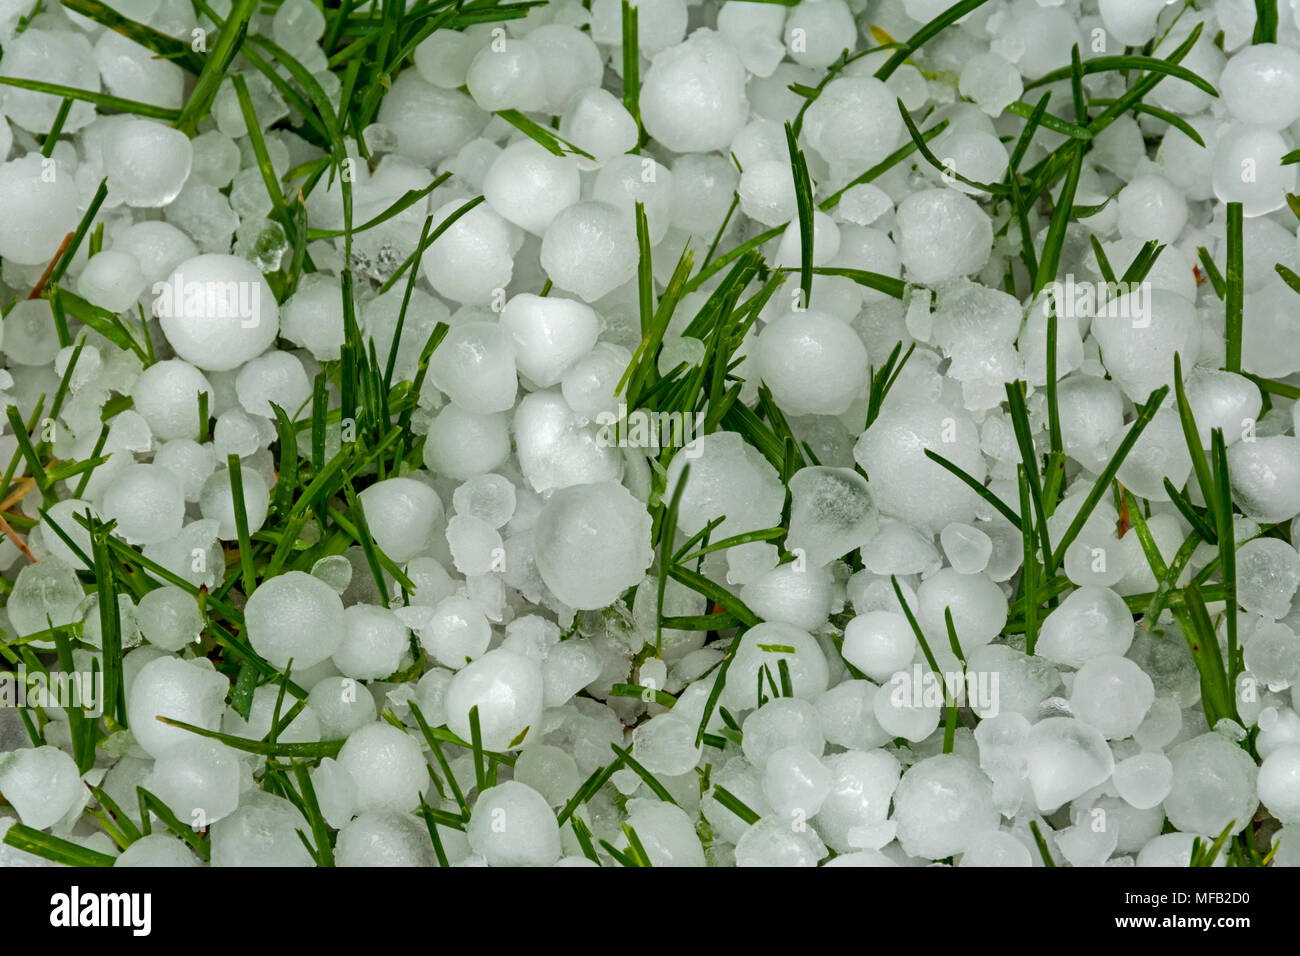 Fresh hail stones in grass from May thunderstorm, Aurora Colorado US. Stock Photo